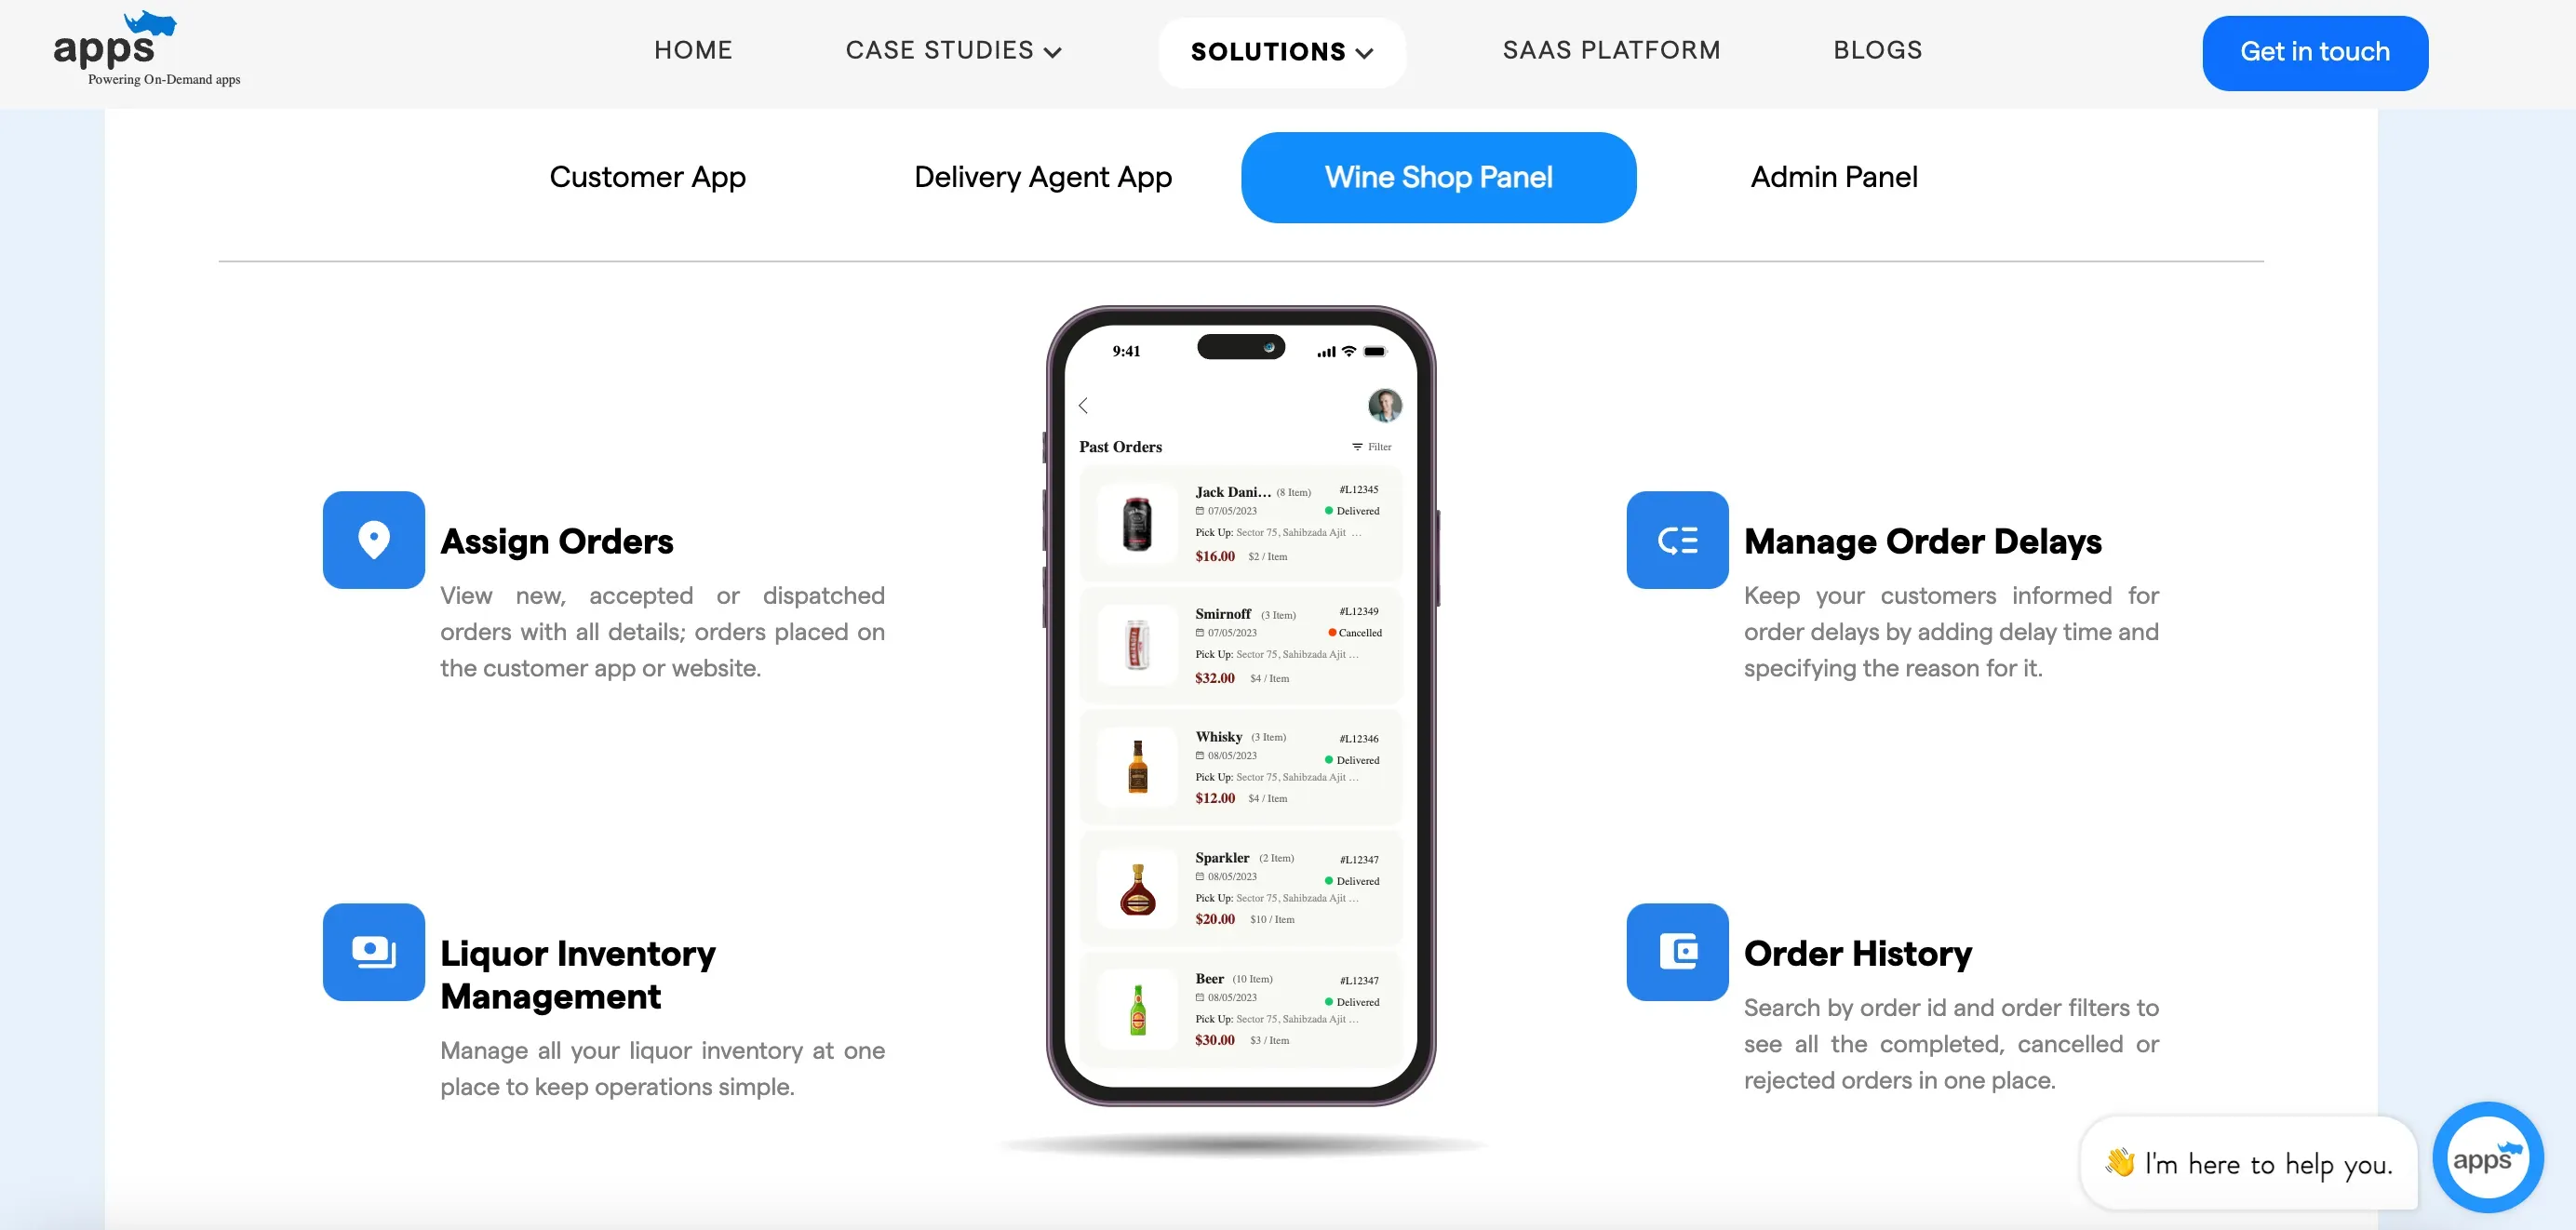 AppsRhino's Delivery App Solution